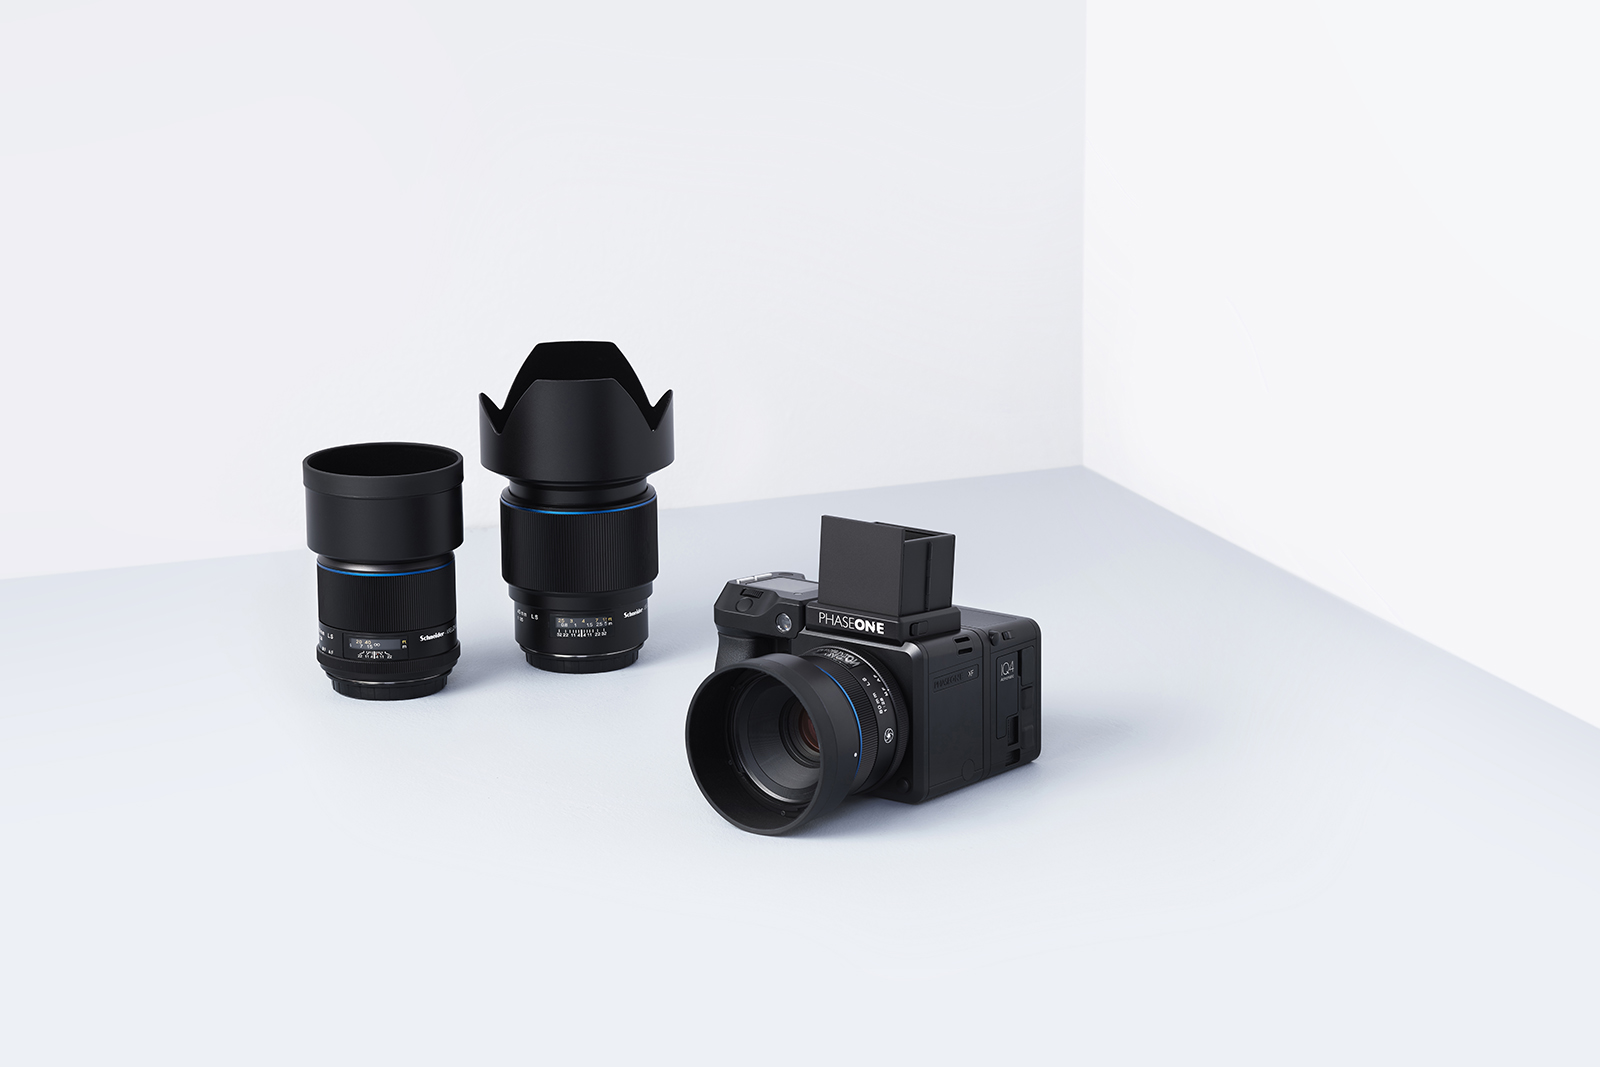 phase one infinity xf announced iq4 150mp achromatic camera system example kit